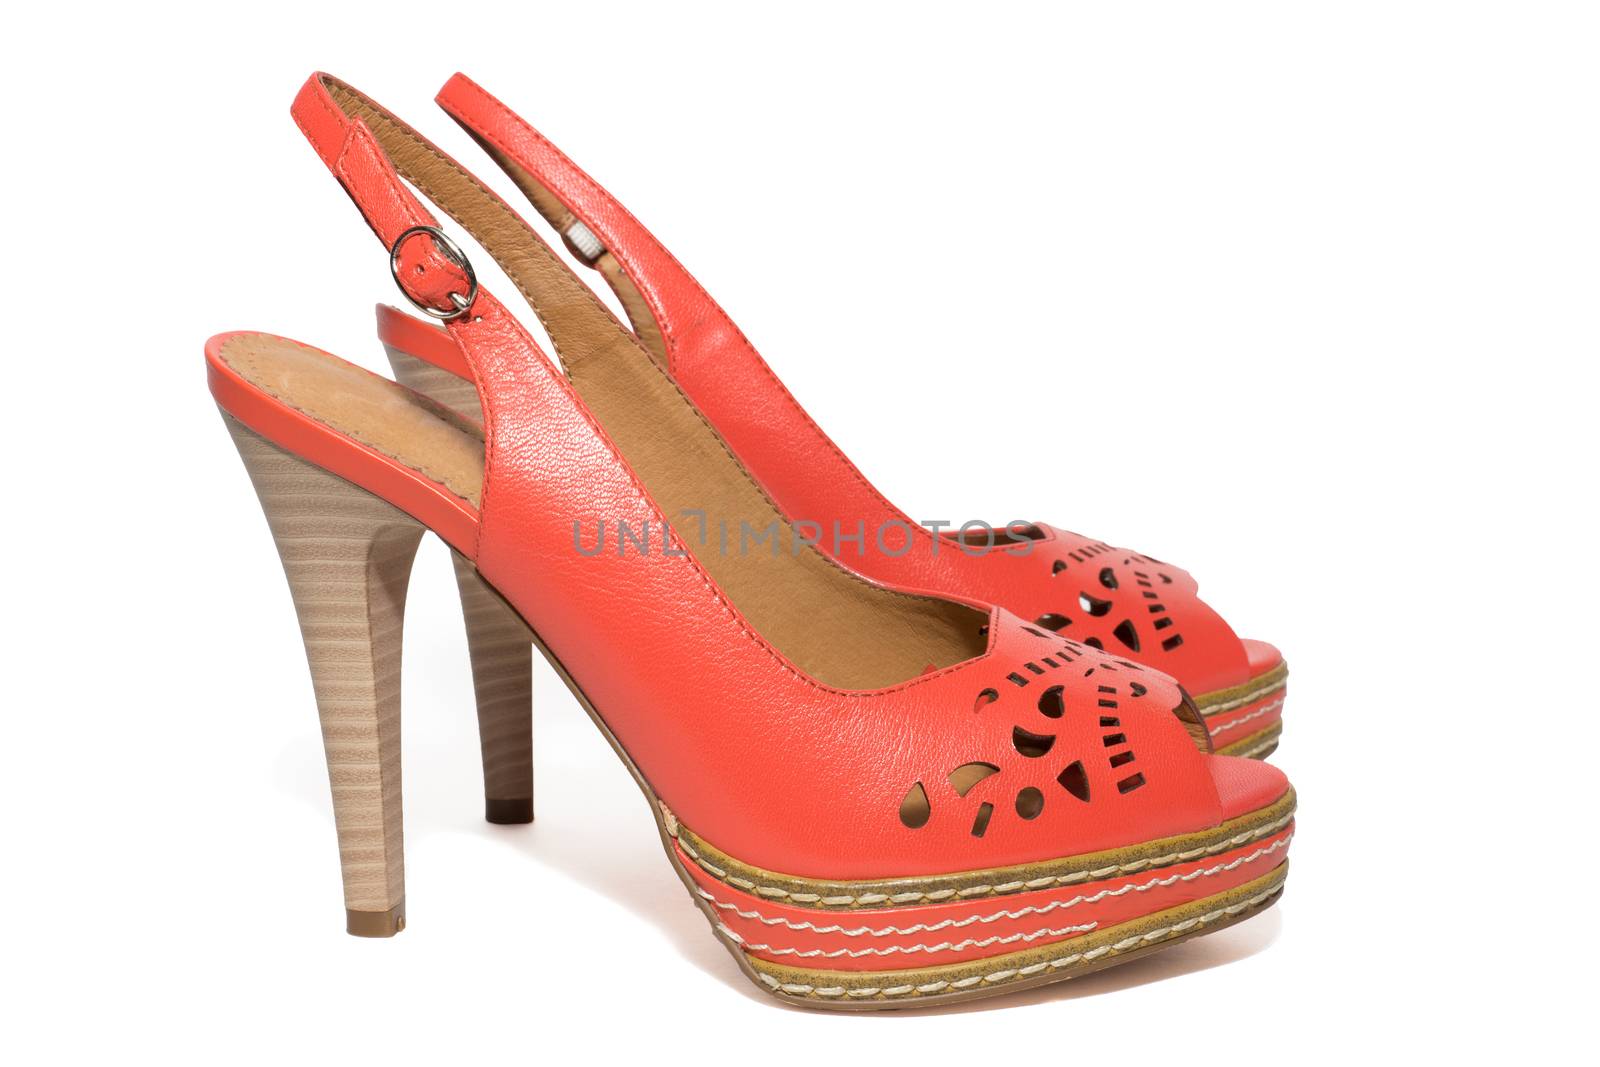 The photo shows women's shoes on a white background